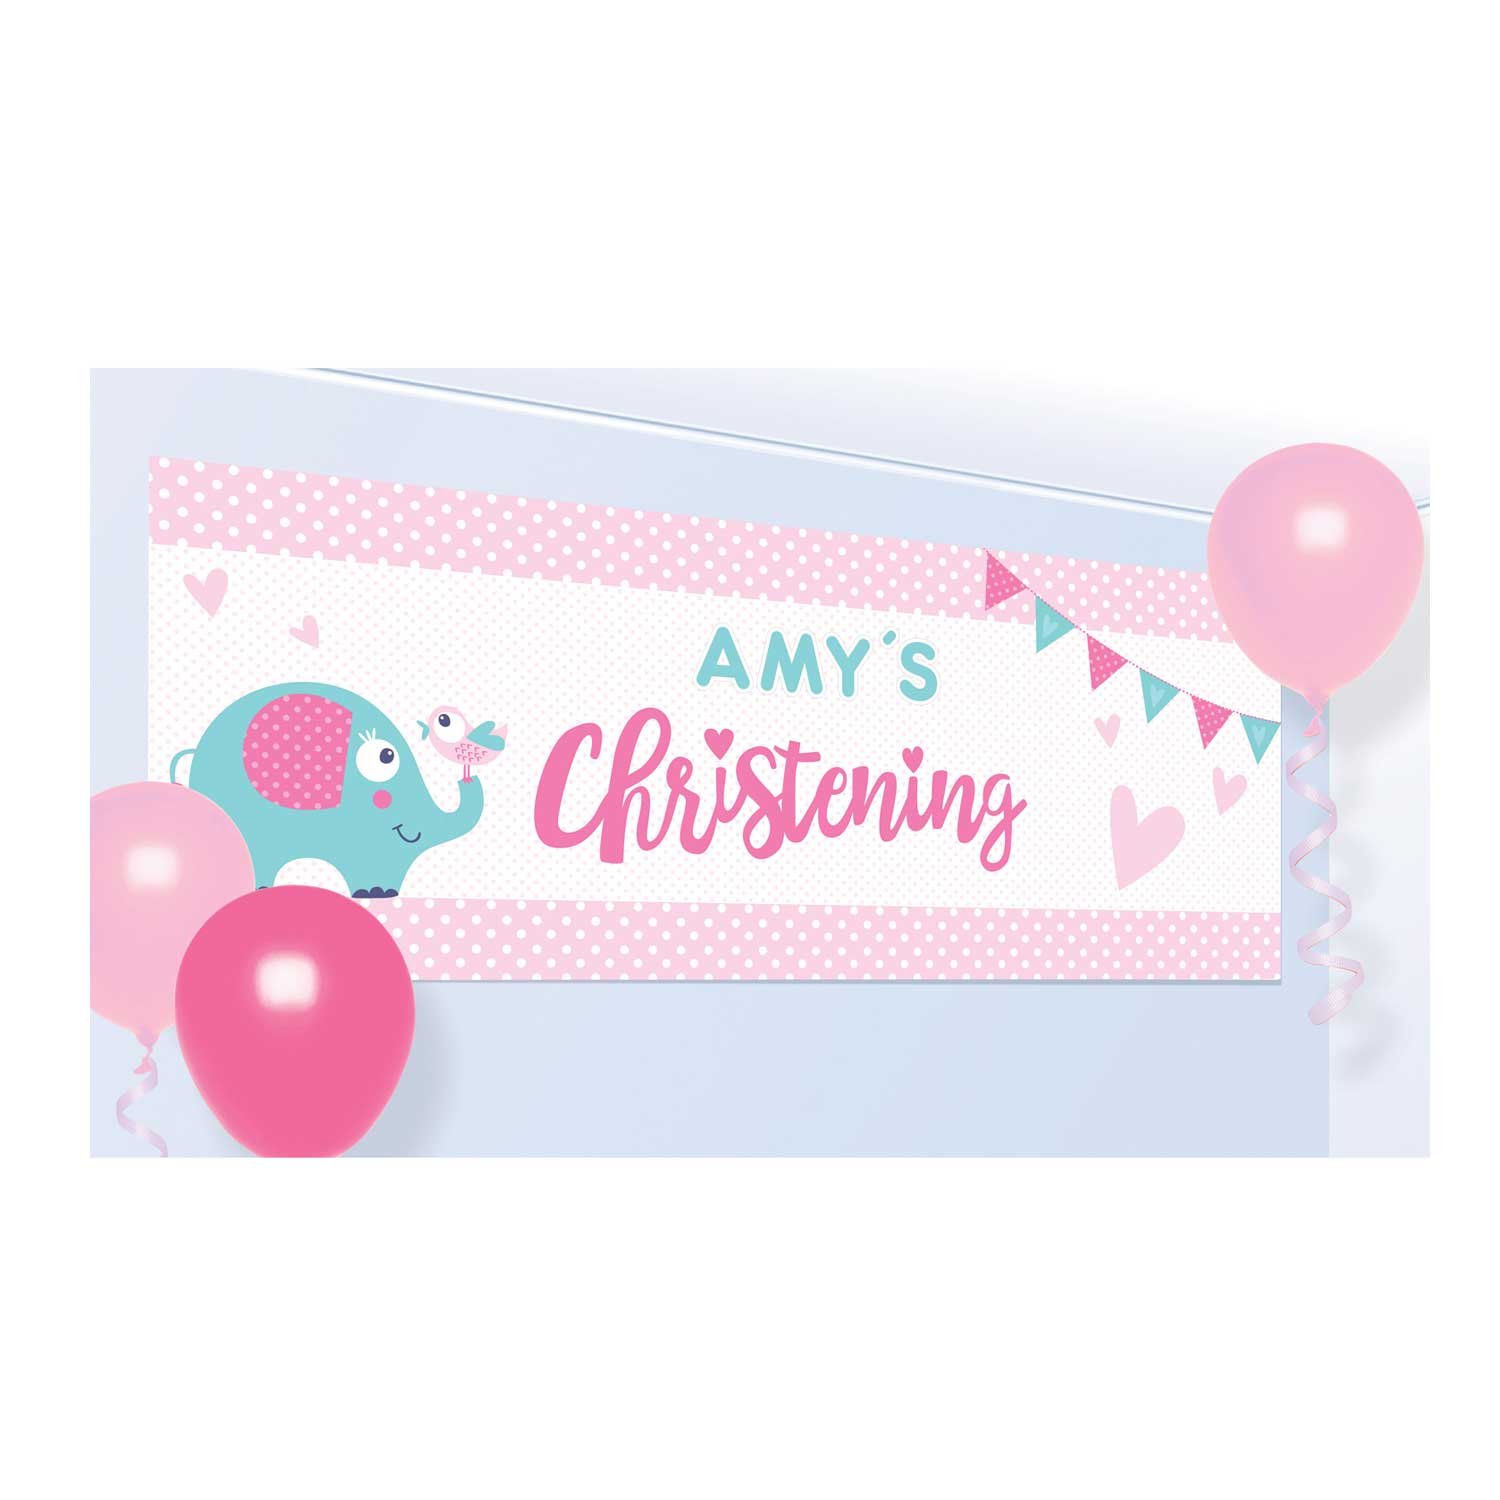 On Your Christening Day Pink Personalized Banner Decorations - Party Centre